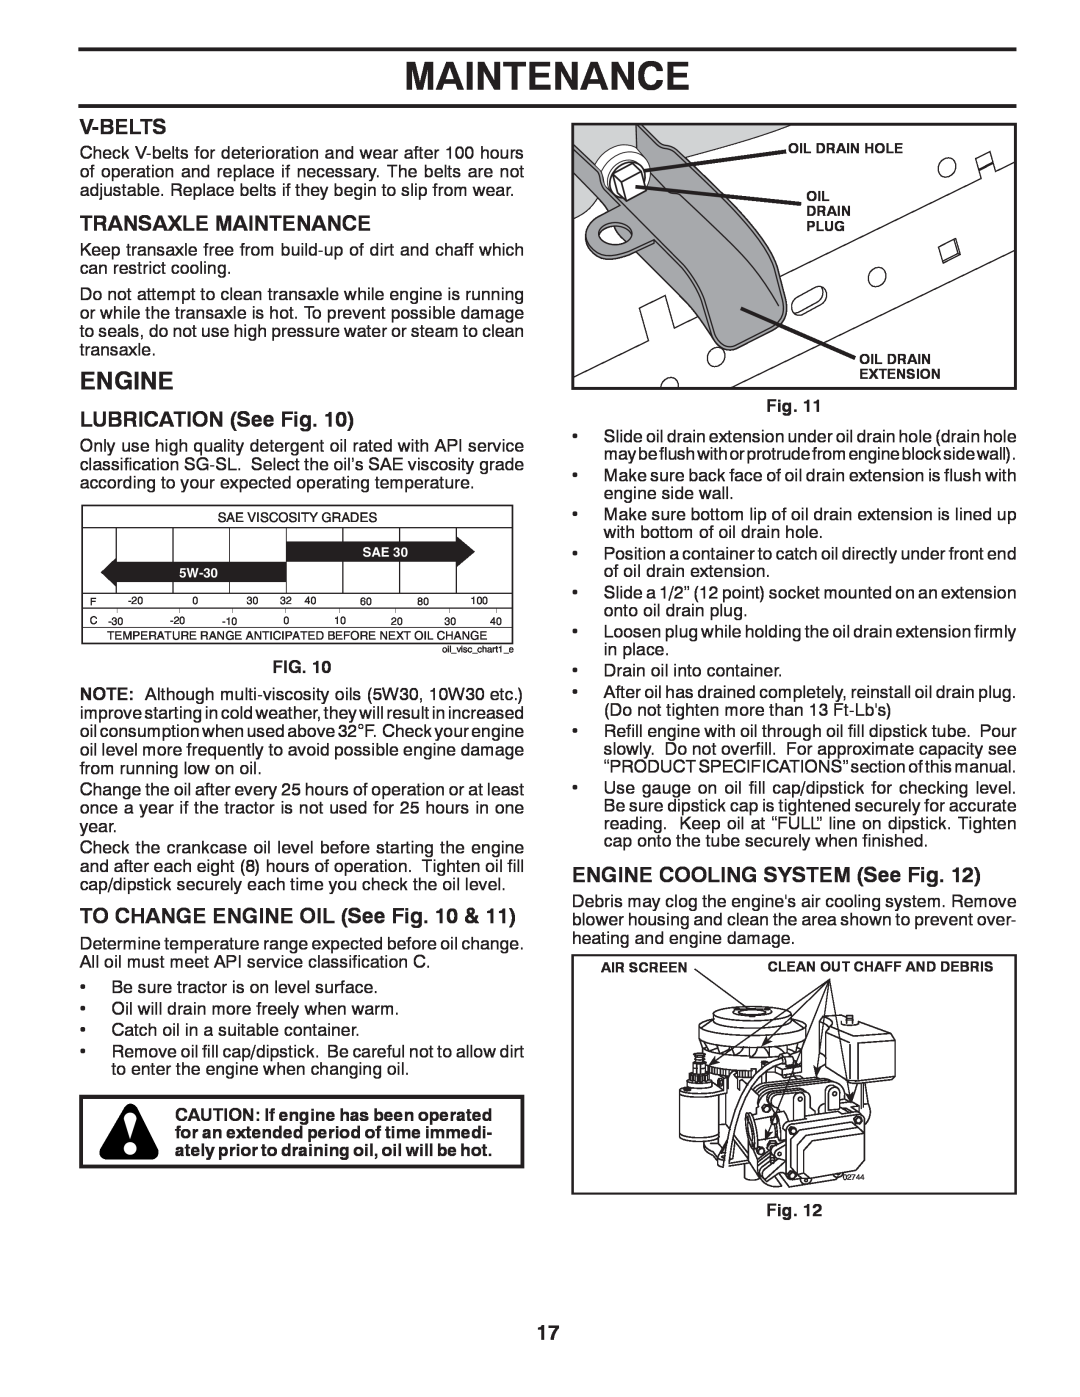 Poulan 433507, 96012010900 manual Engine, V-Belts, Transaxle Maintenance, LUBRICATION See Fig, TO CHANGE ENGINE OIL See Fig 